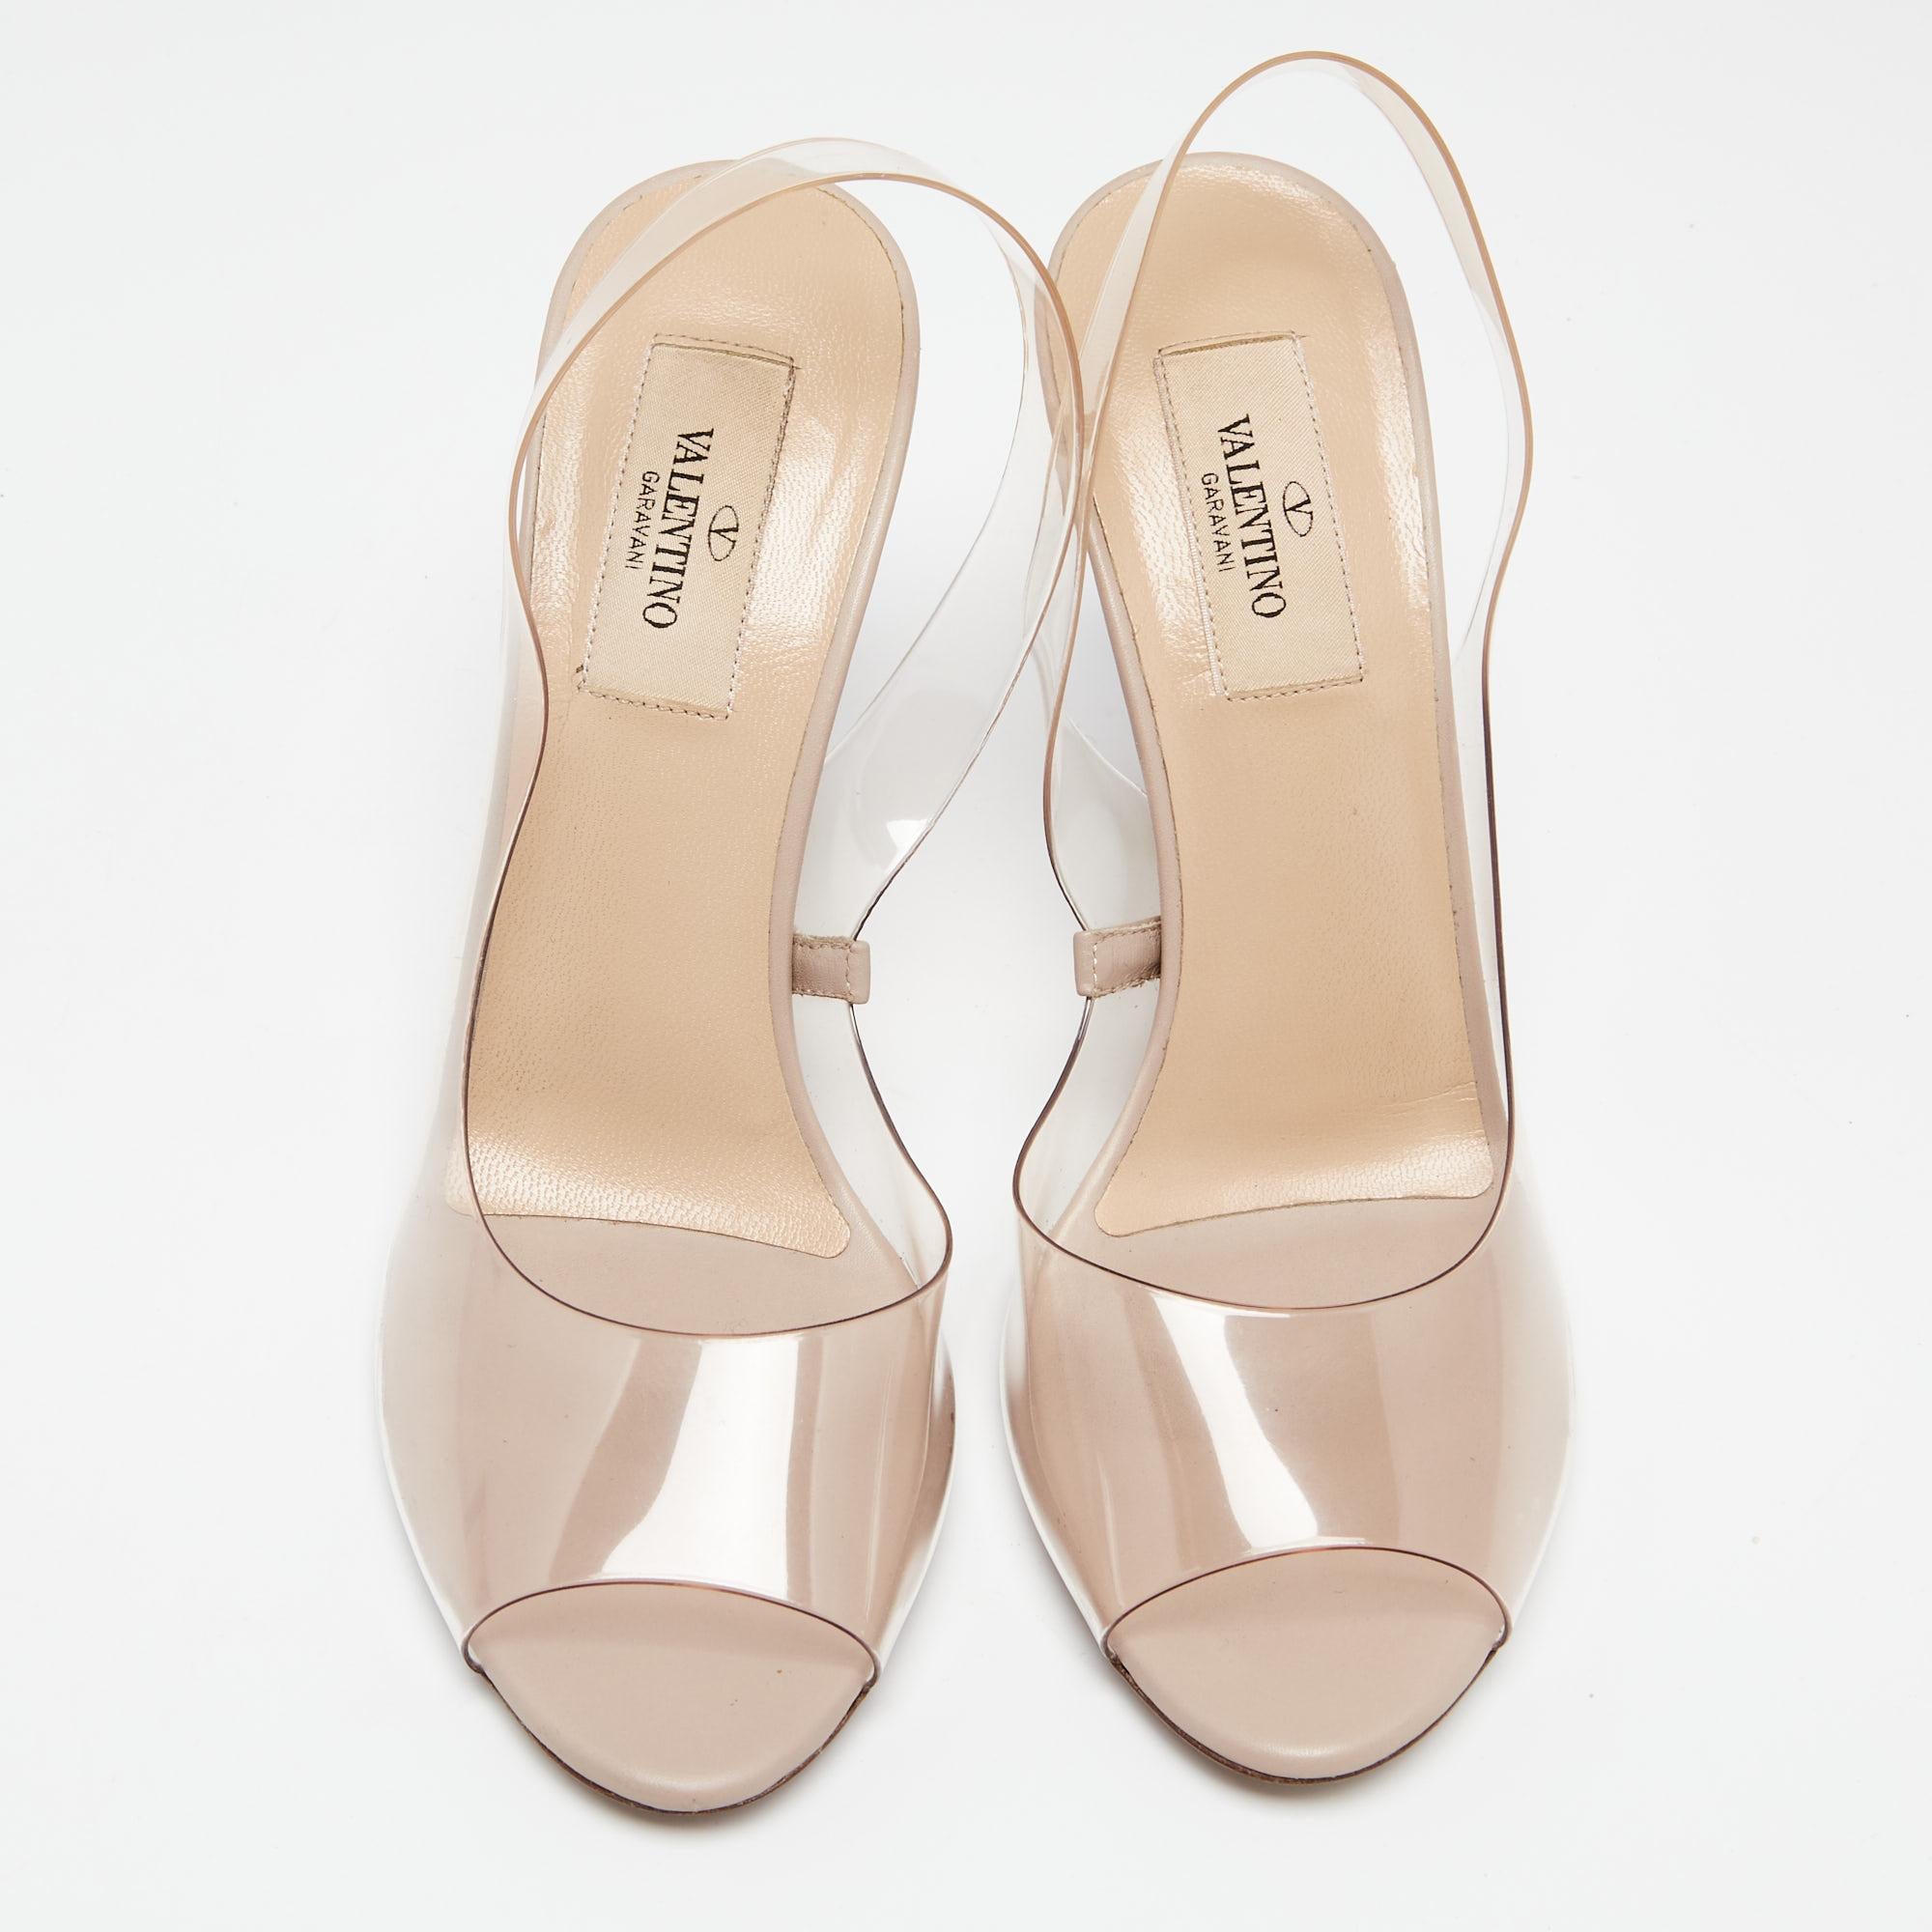 These sandals from the House of Valentino are all about class and elegance! They are made from PVC on the exterior. They have peep toes, Rockstud embellishments, a slingback, and 10 cm heels. Flaunt your chic style with these Valentino